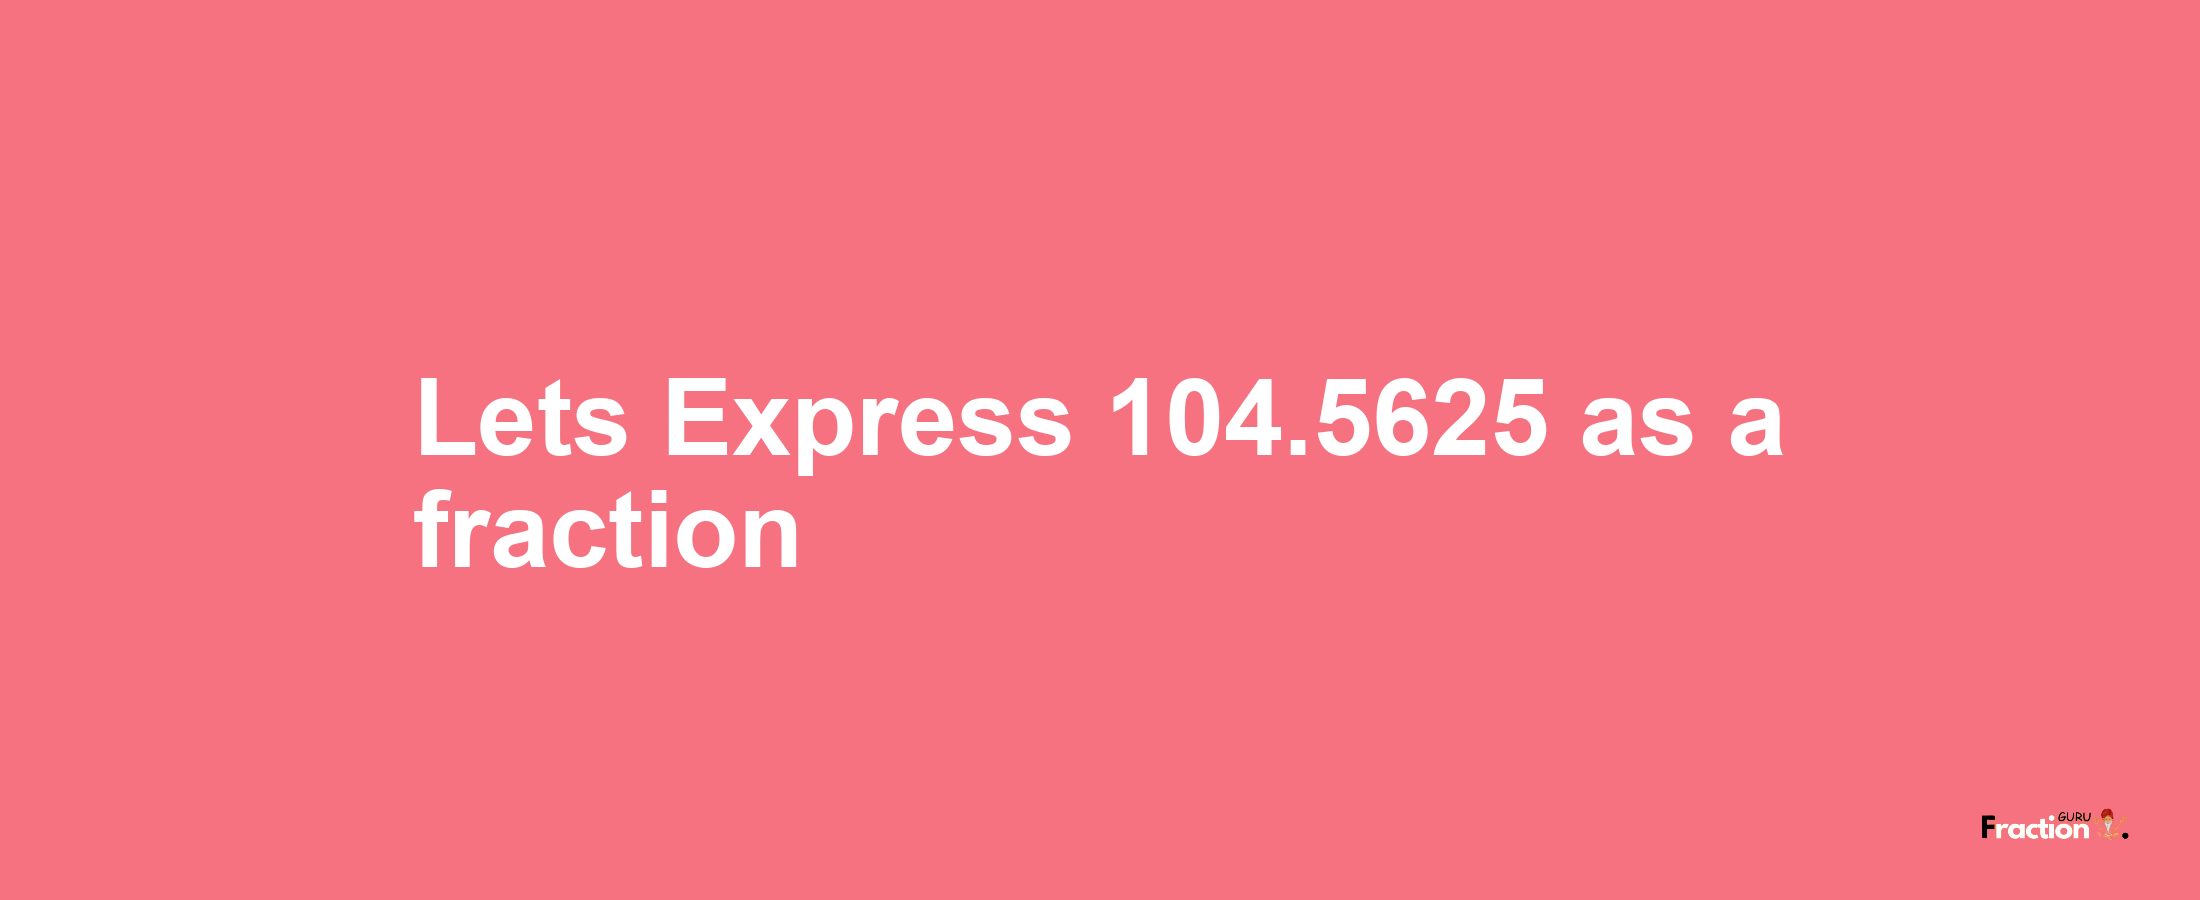 Lets Express 104.5625 as afraction